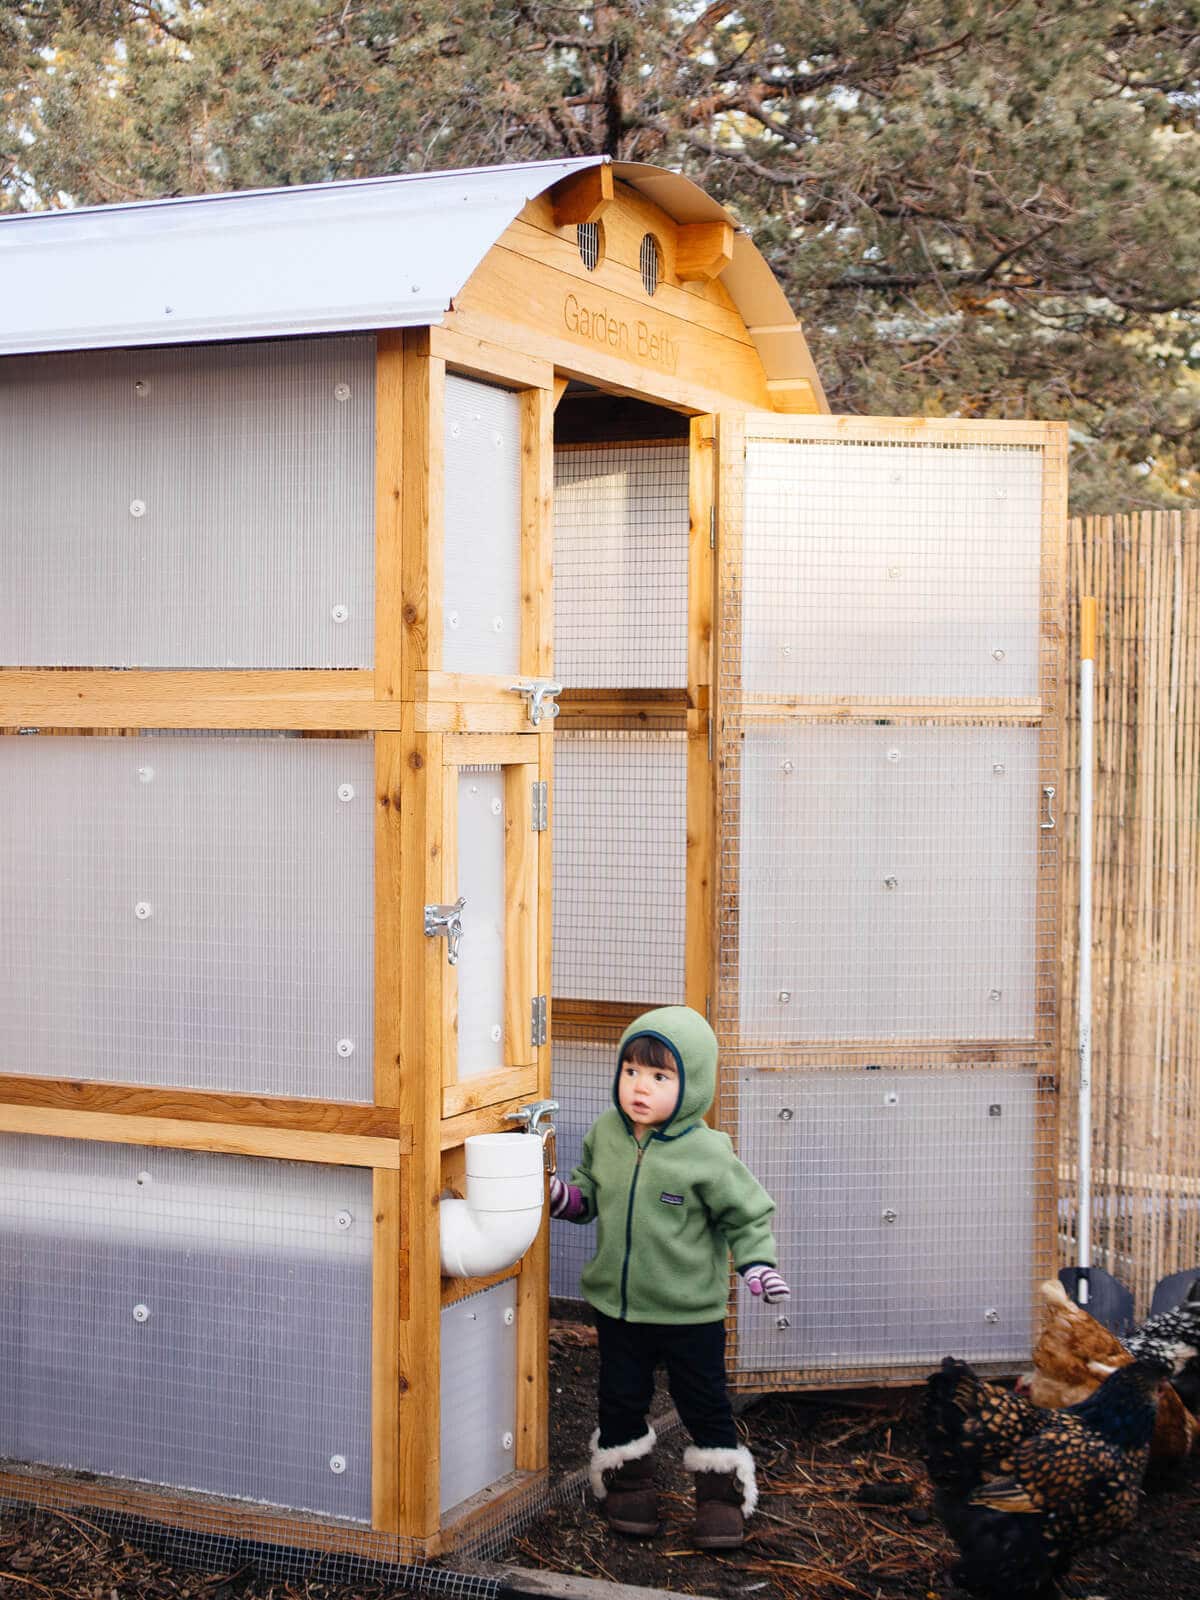 A chicken coop stormproofed with translucent twinwall plastic panels